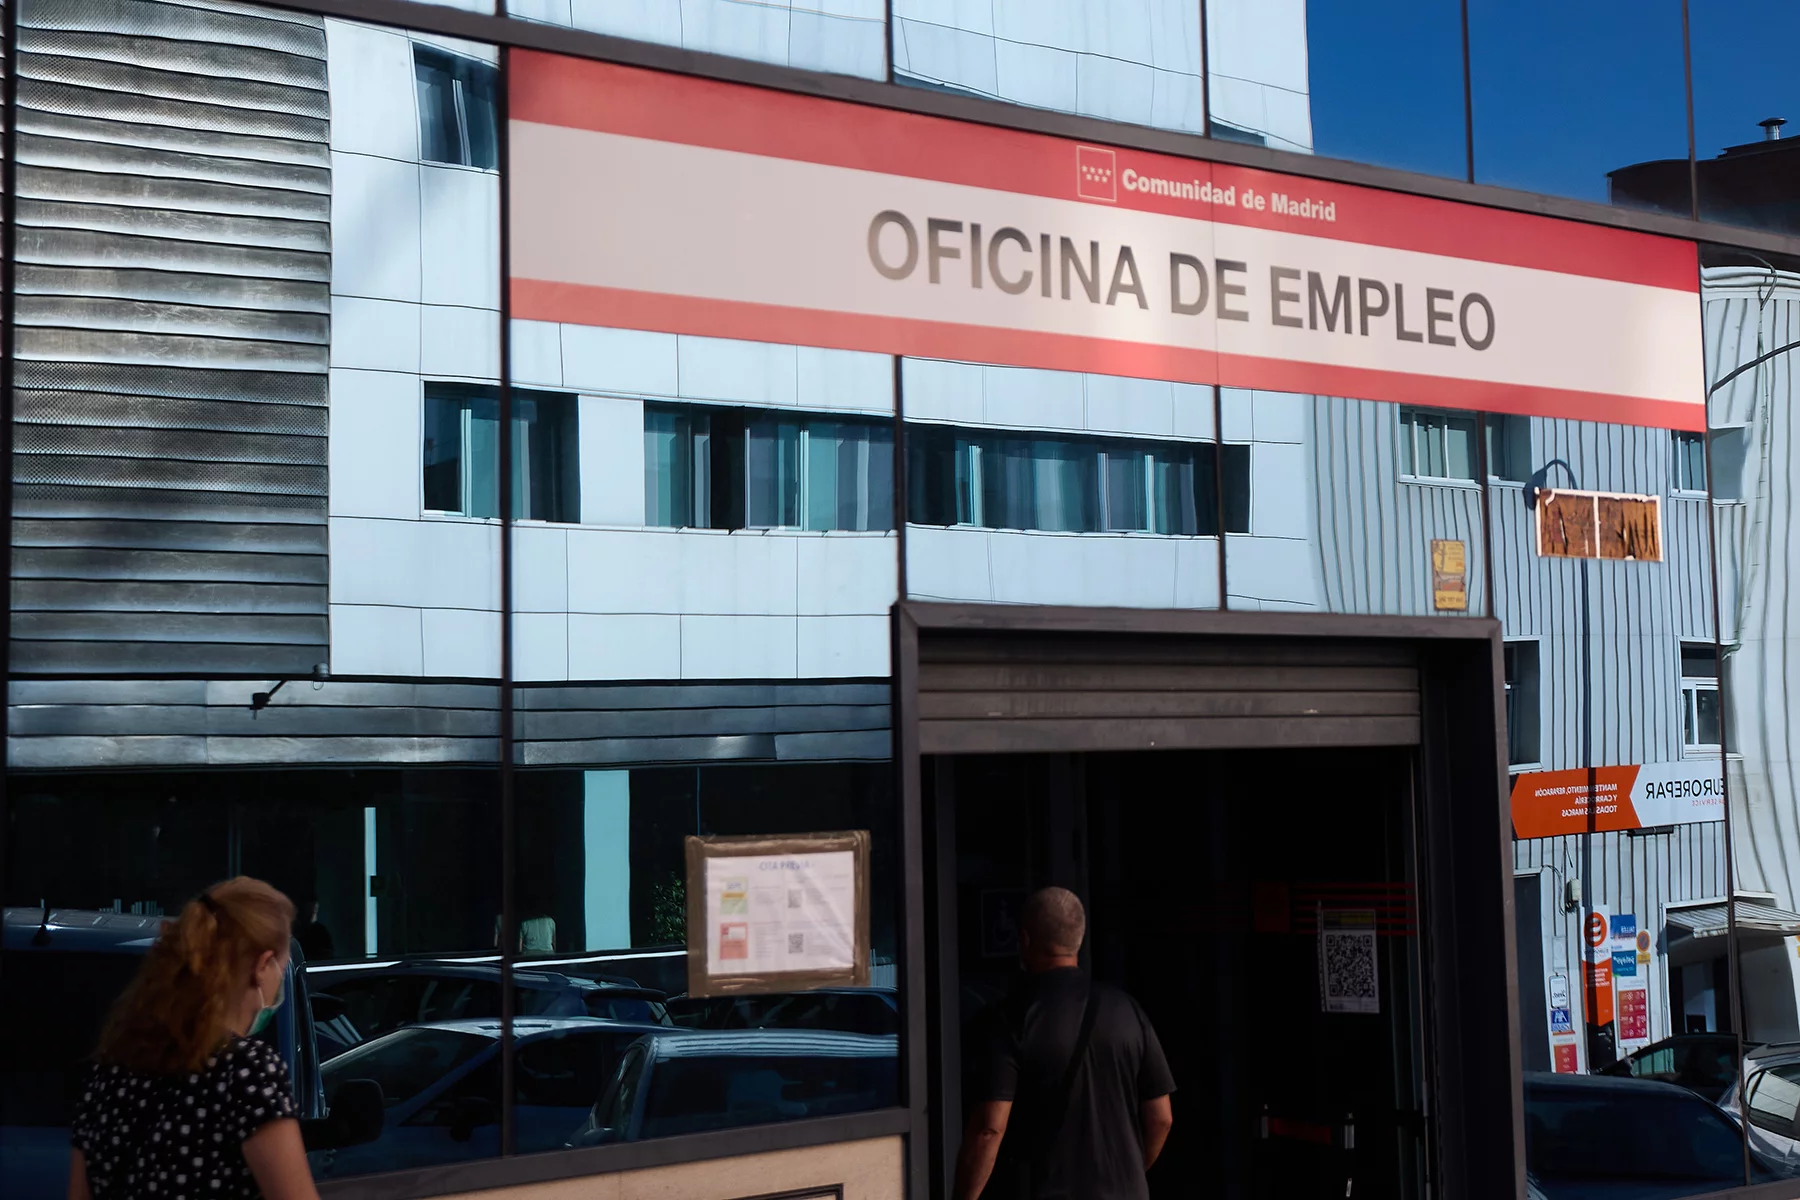 A glass facade with a sign saying 'Oficina de Empleo' (Employment Office)